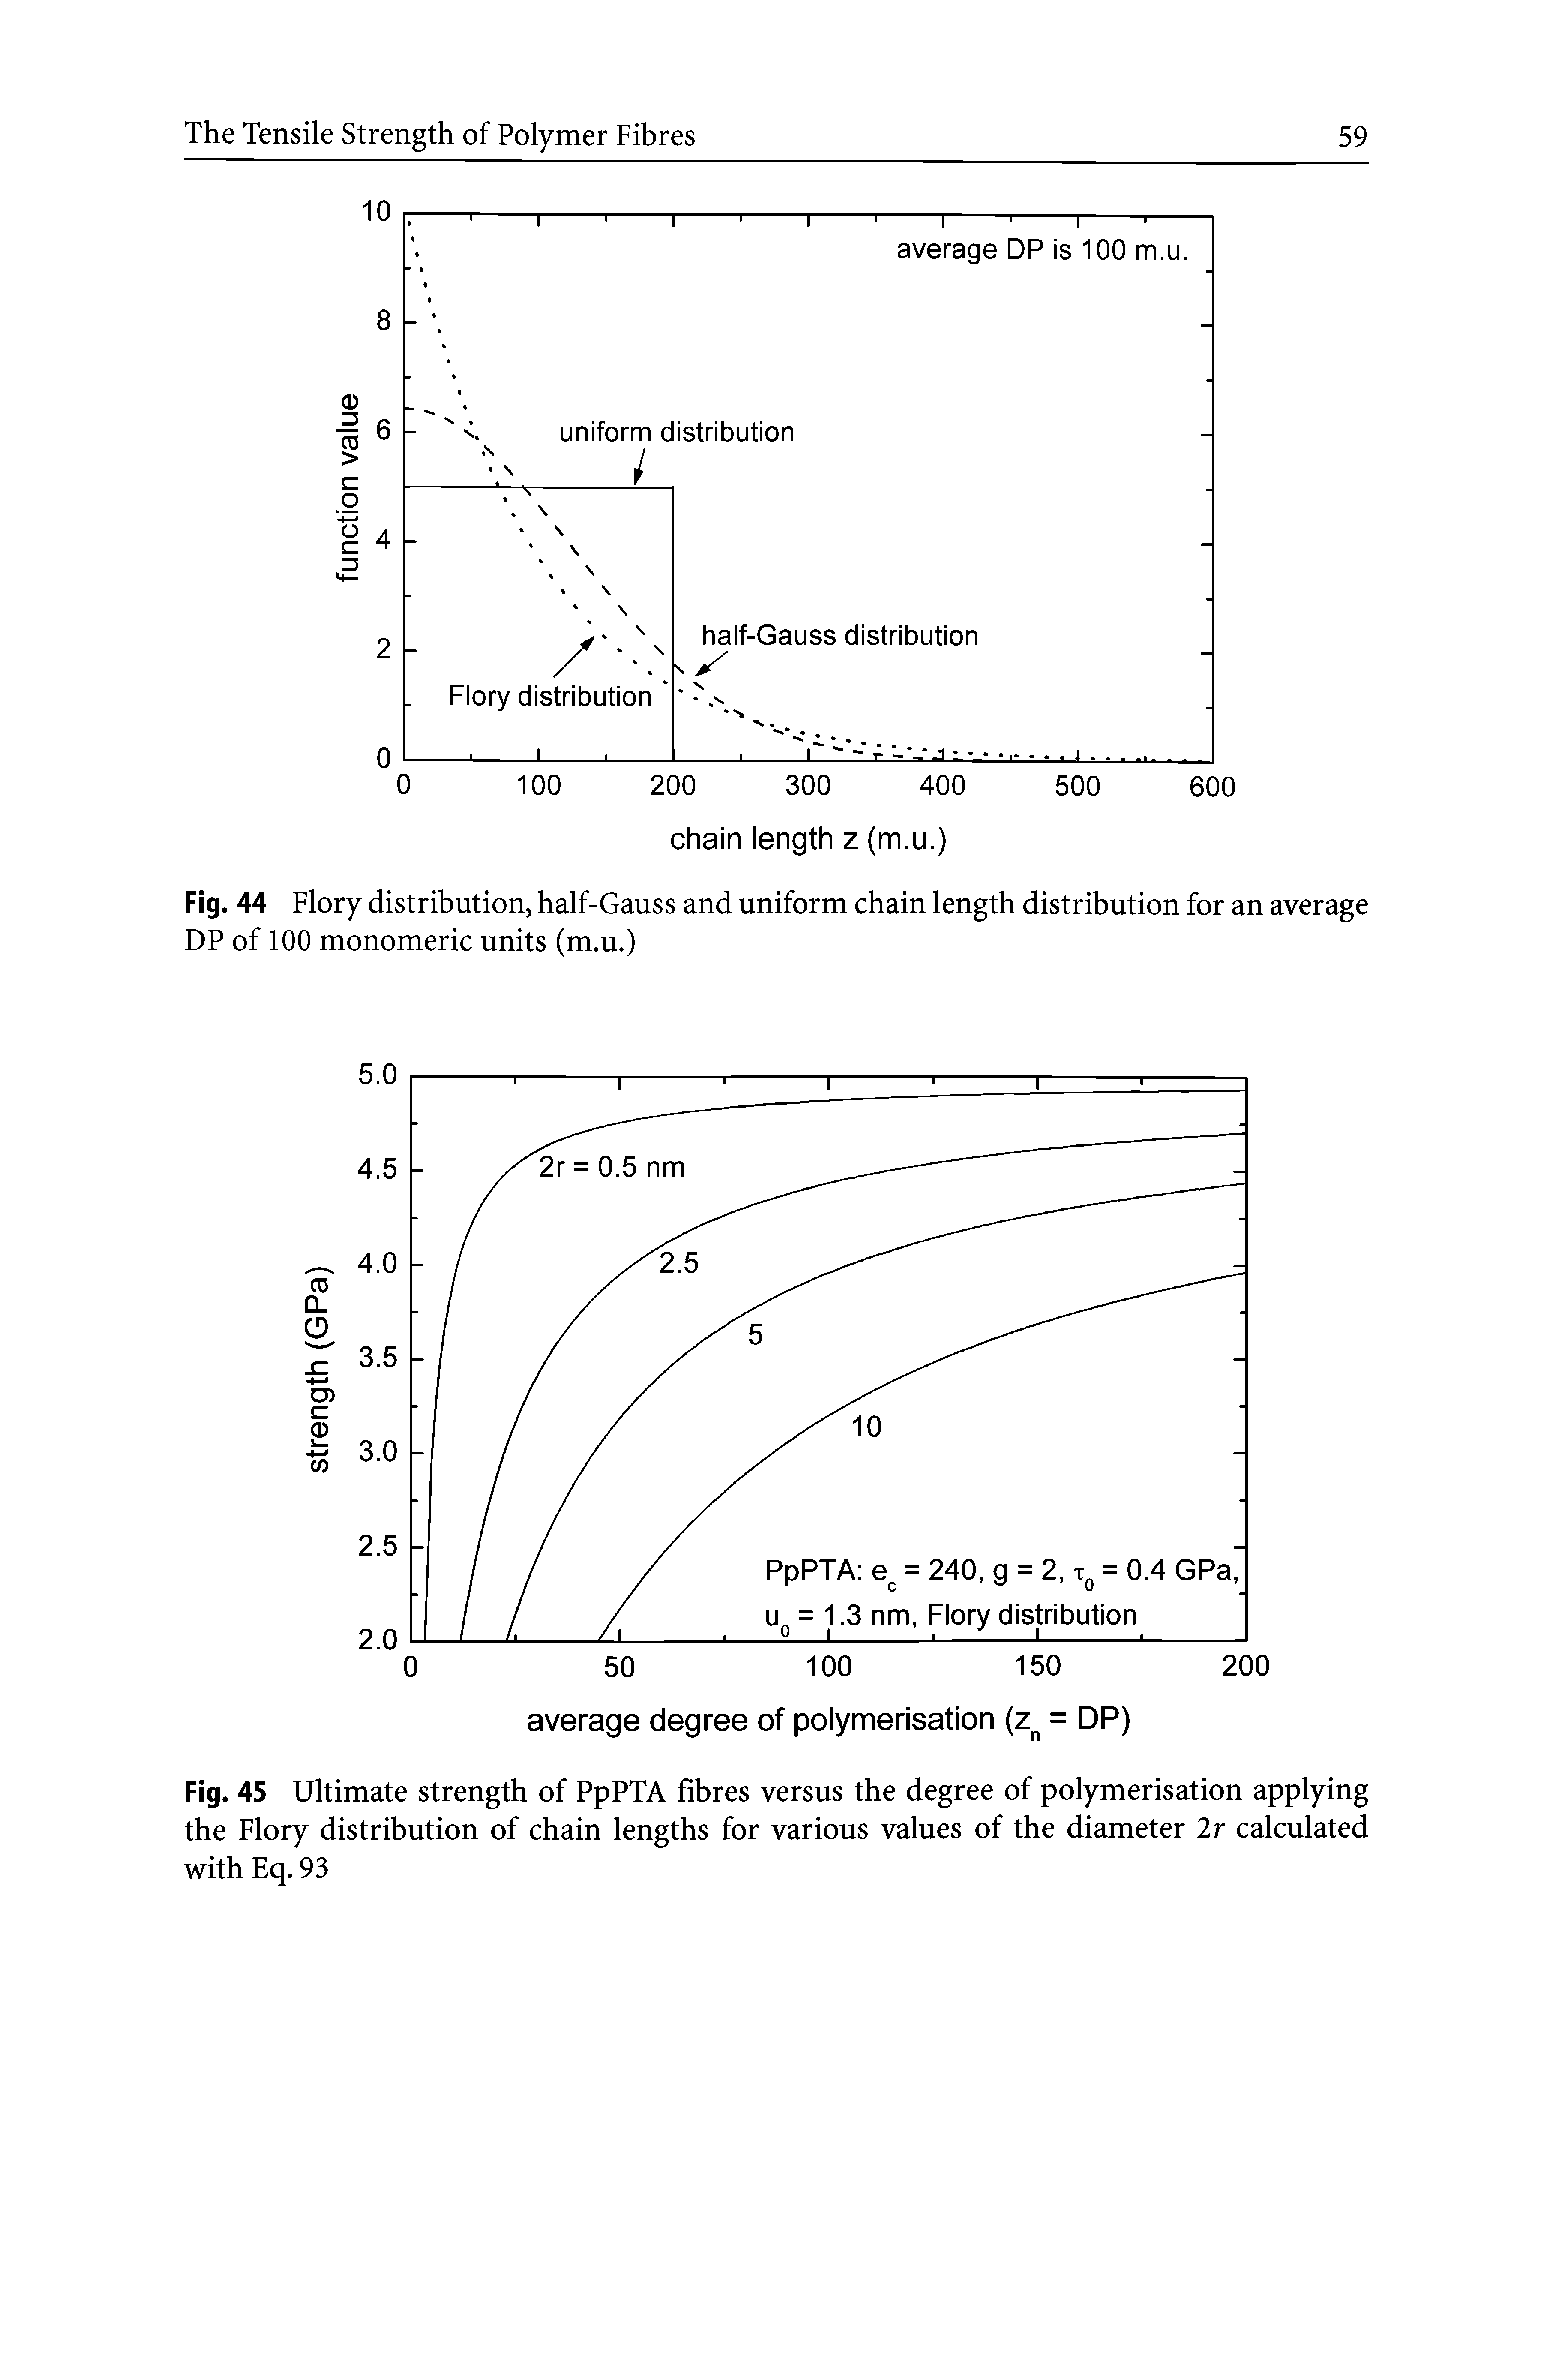 Fig. 45 Ultimate strength of PpPTA fibres versus the degree of polymerisation applying the Flory distribution of chain lengths for various values of the diameter 2 r calculated with Eq. 93...